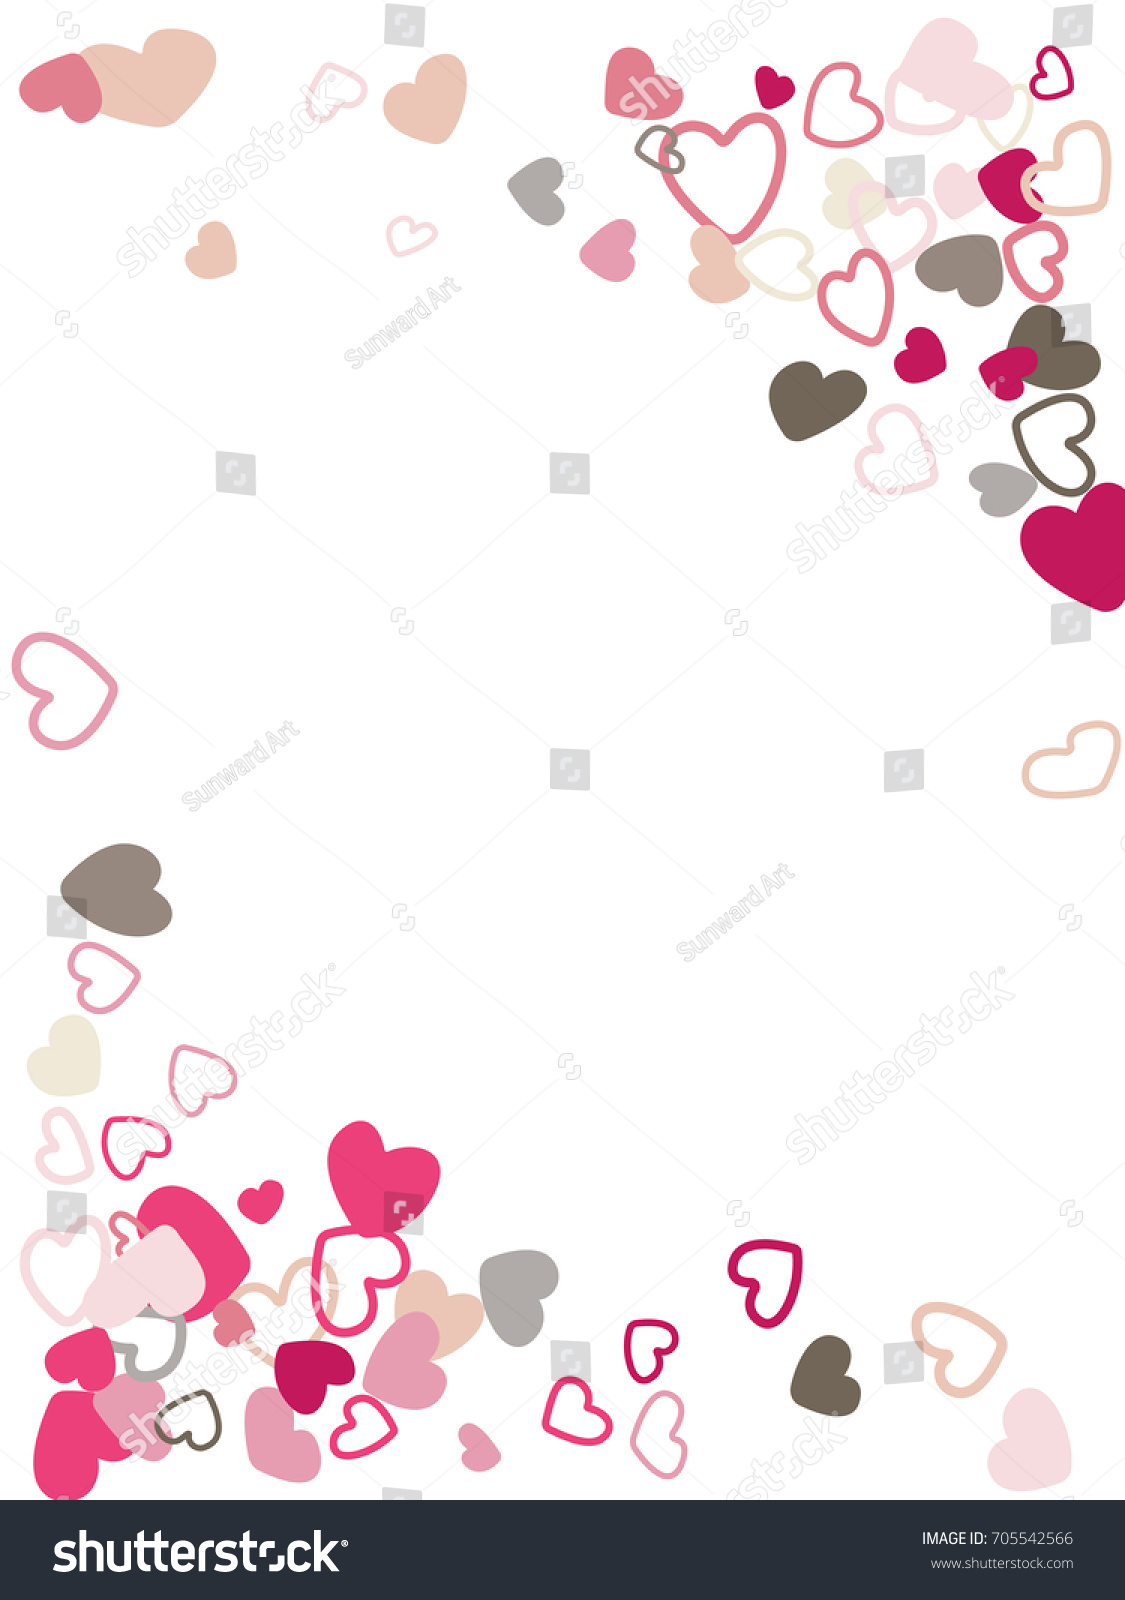 Download Flying Hearts Vector Border Corners Background Stock ...